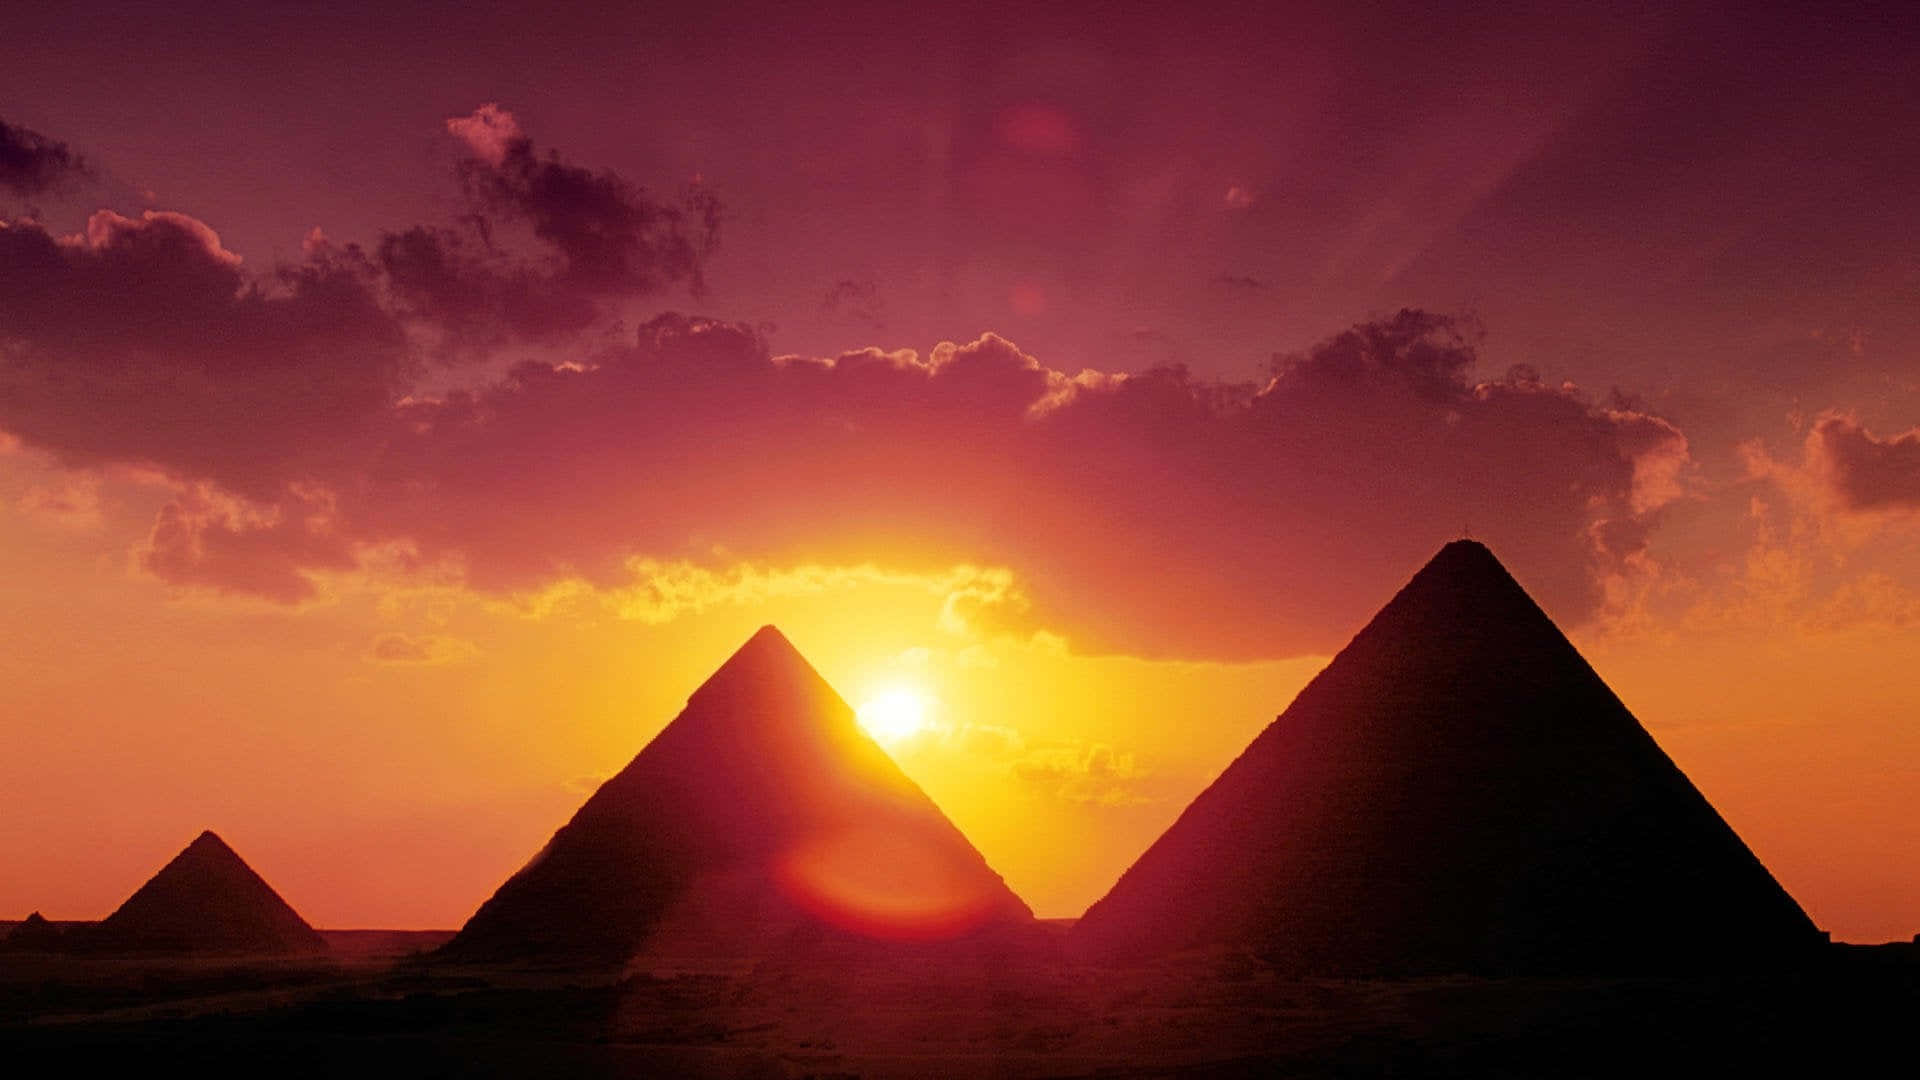 Explore Ancient Egypt With This Stunning Landscape Background